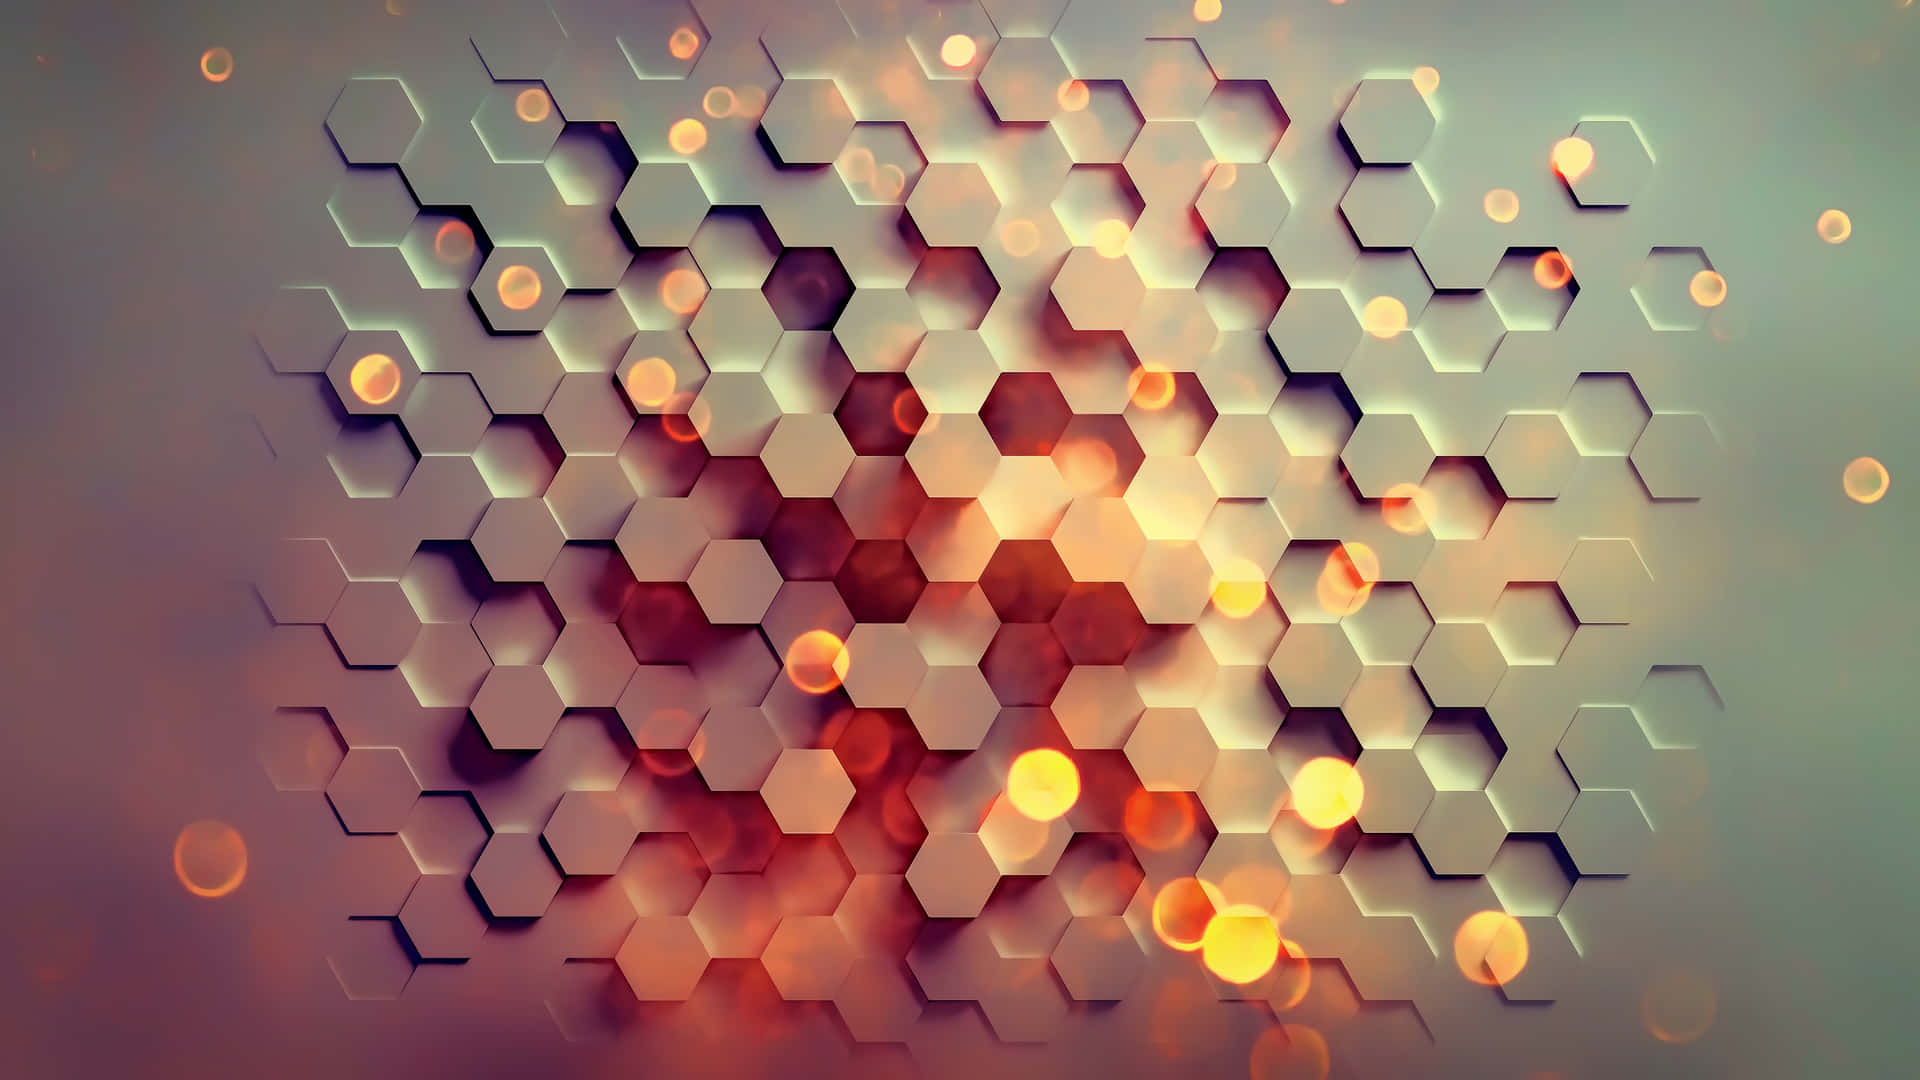 A vibrant purple and pink abstract pattern of connected hexagons Wallpaper